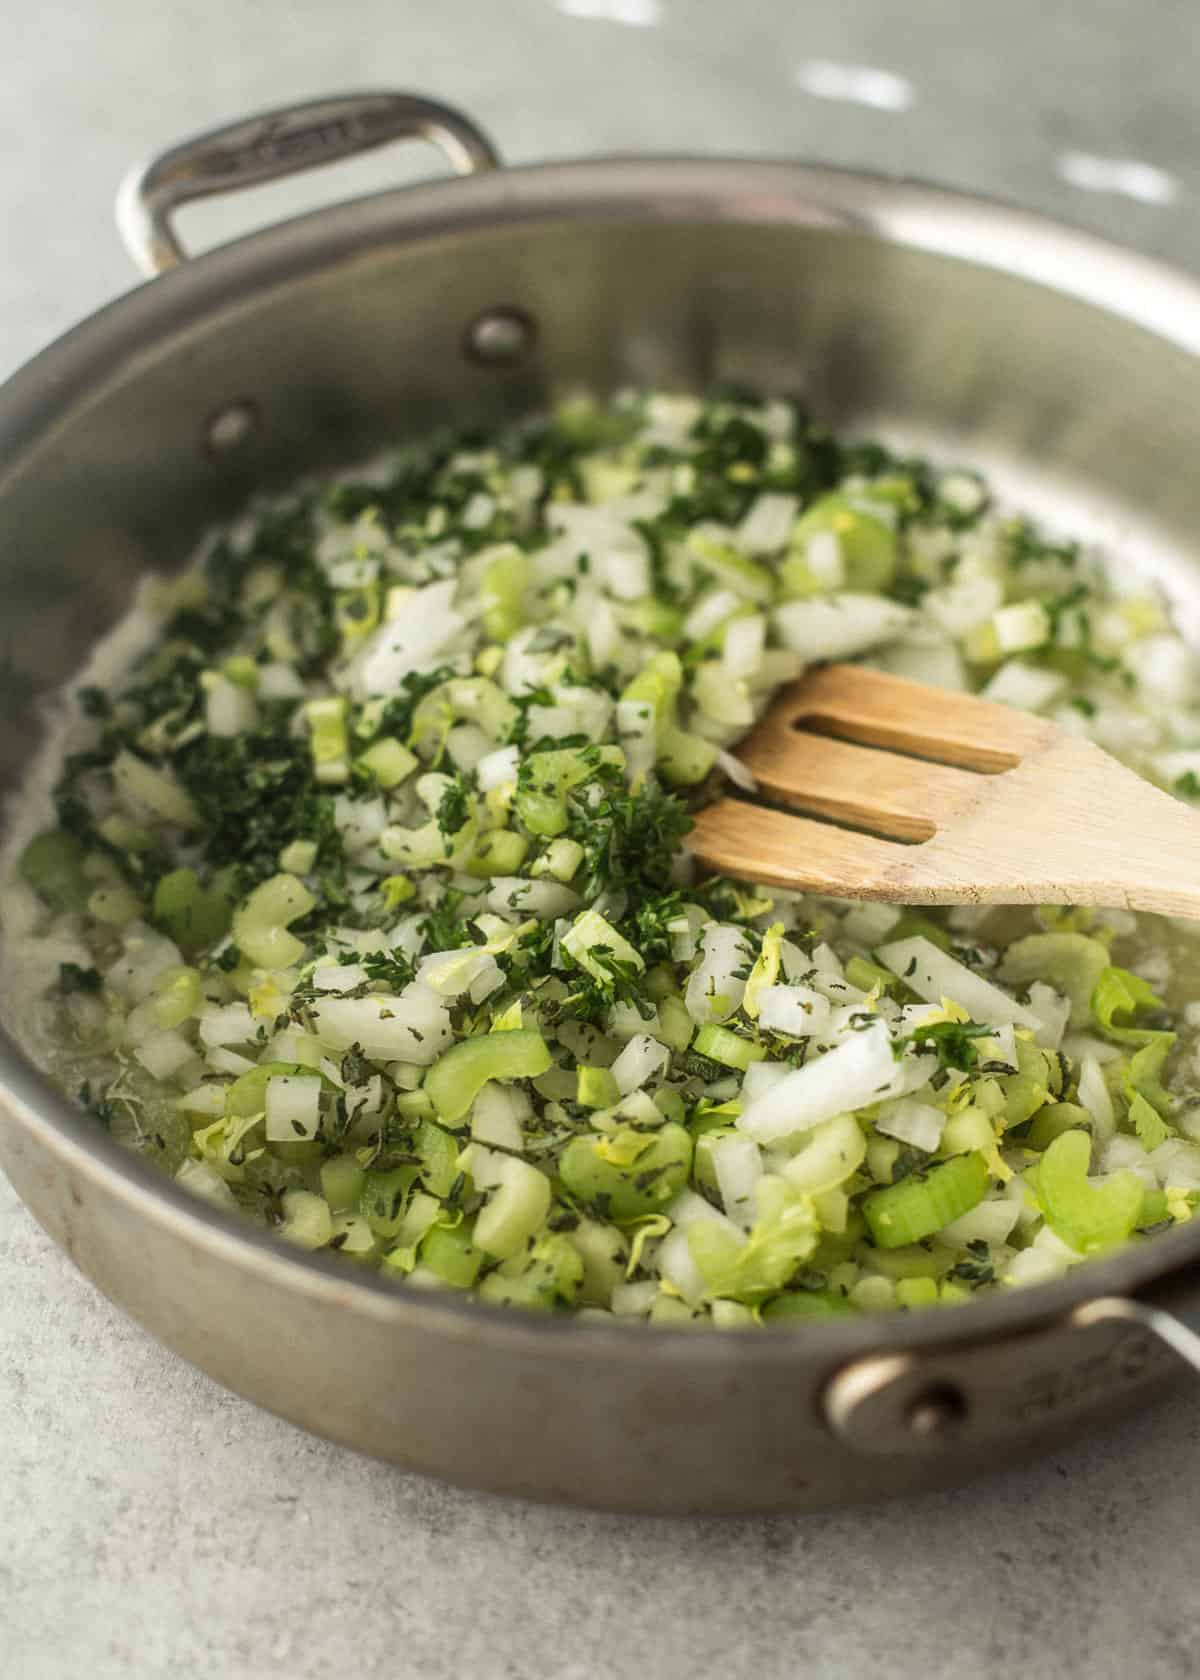 stirring celery, herbs and onion in a skillet